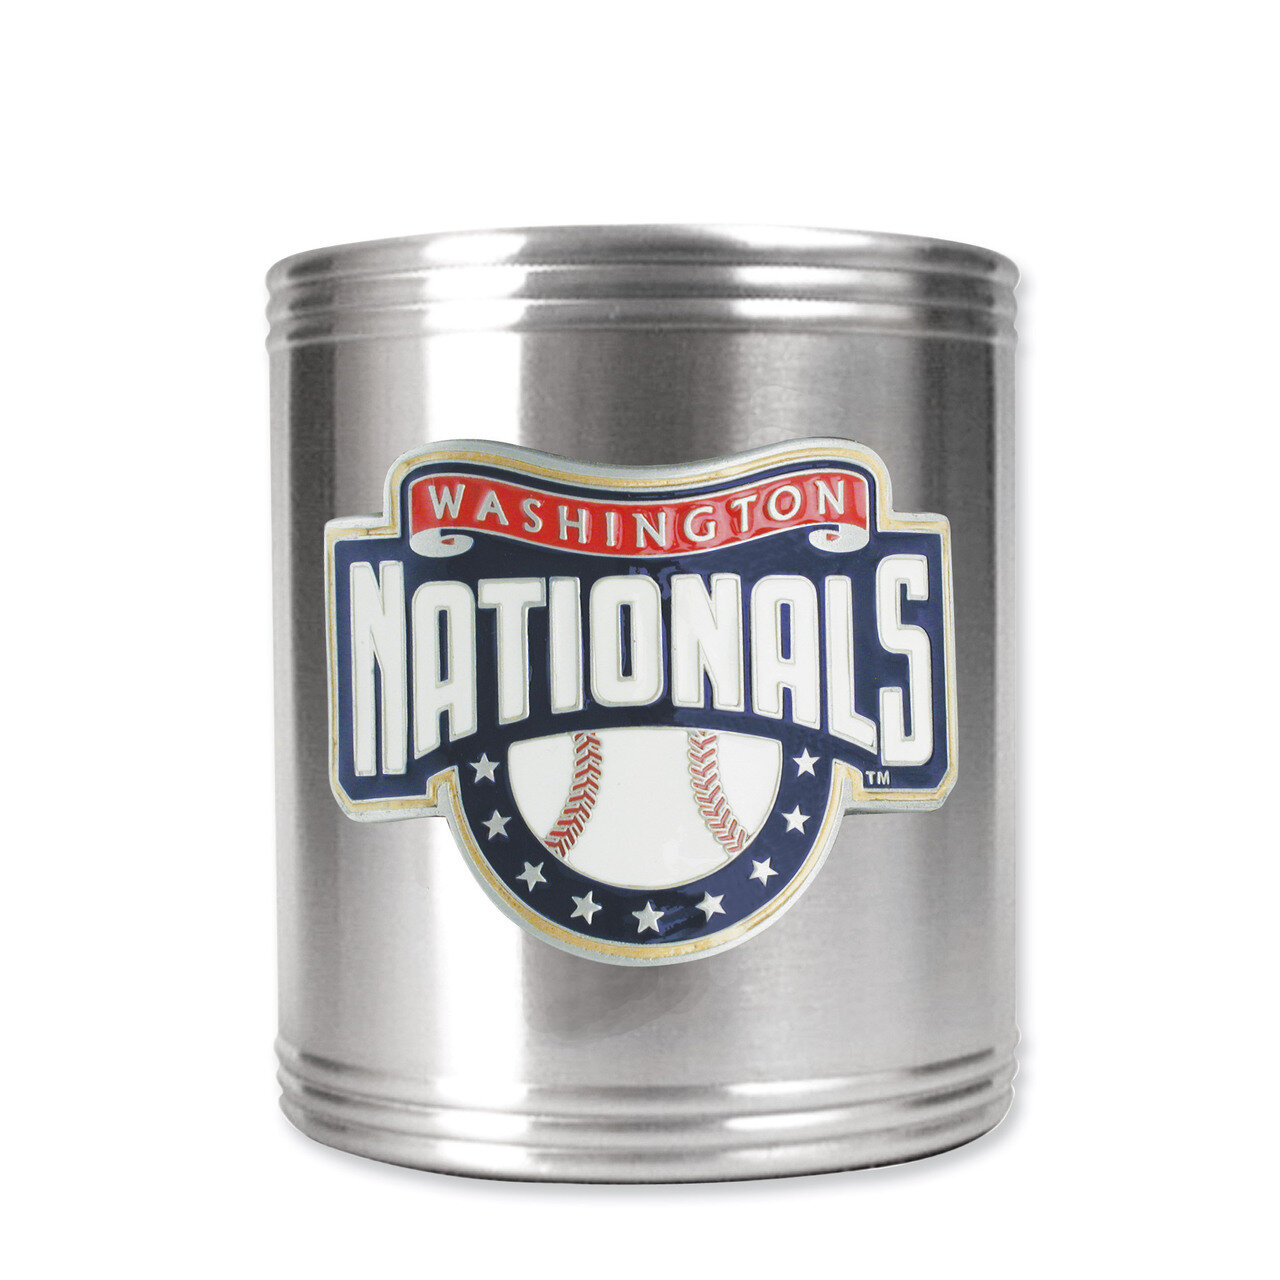 Washington Nationals Insulated Stainless Steel holder GC3087